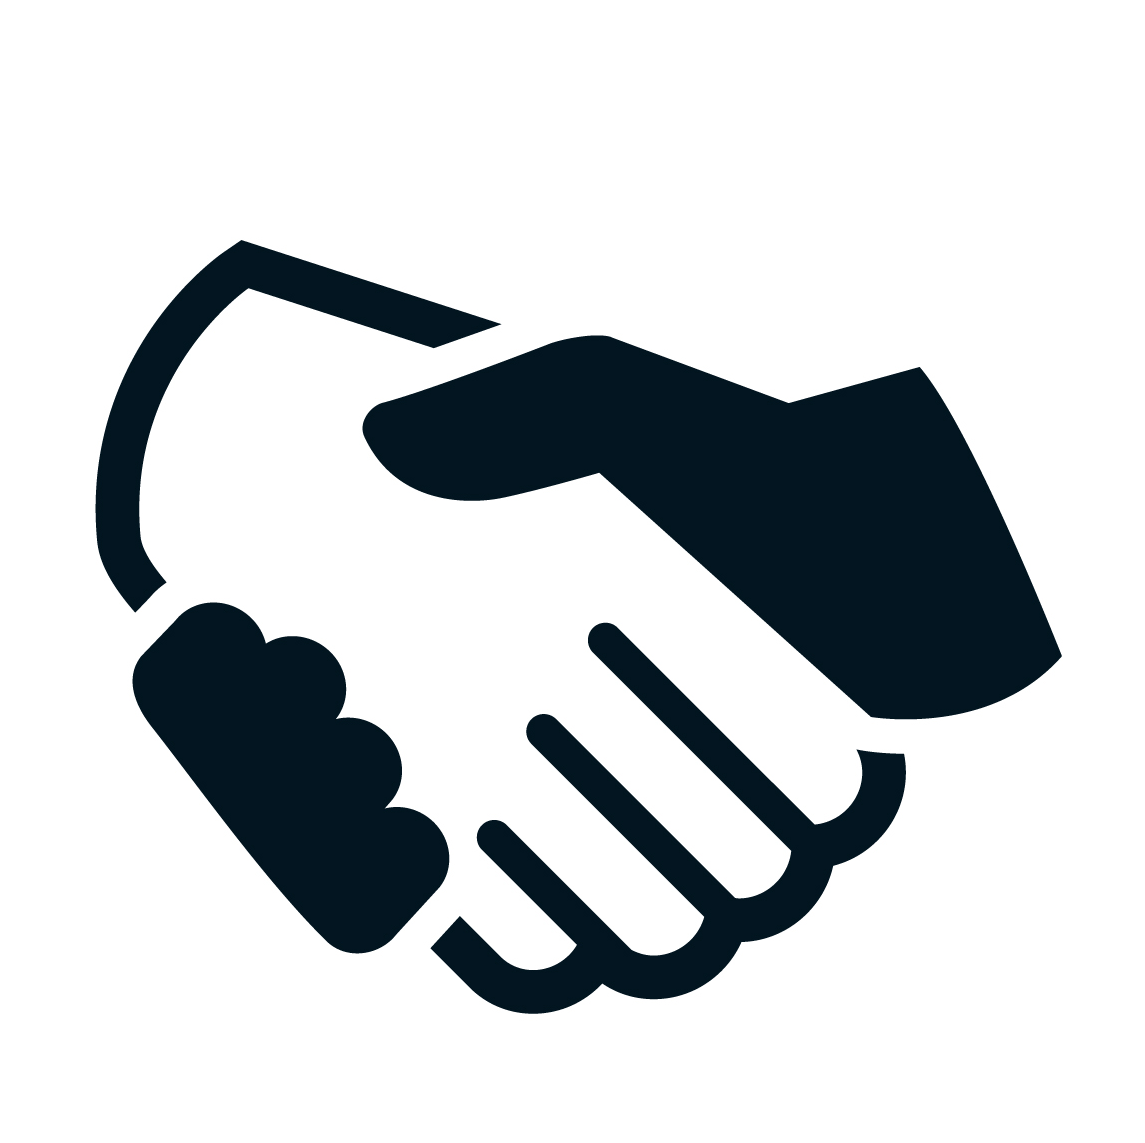 Shaking Hands Logo - Example for the handshake icon element of the logo | CAT 1 - home ...